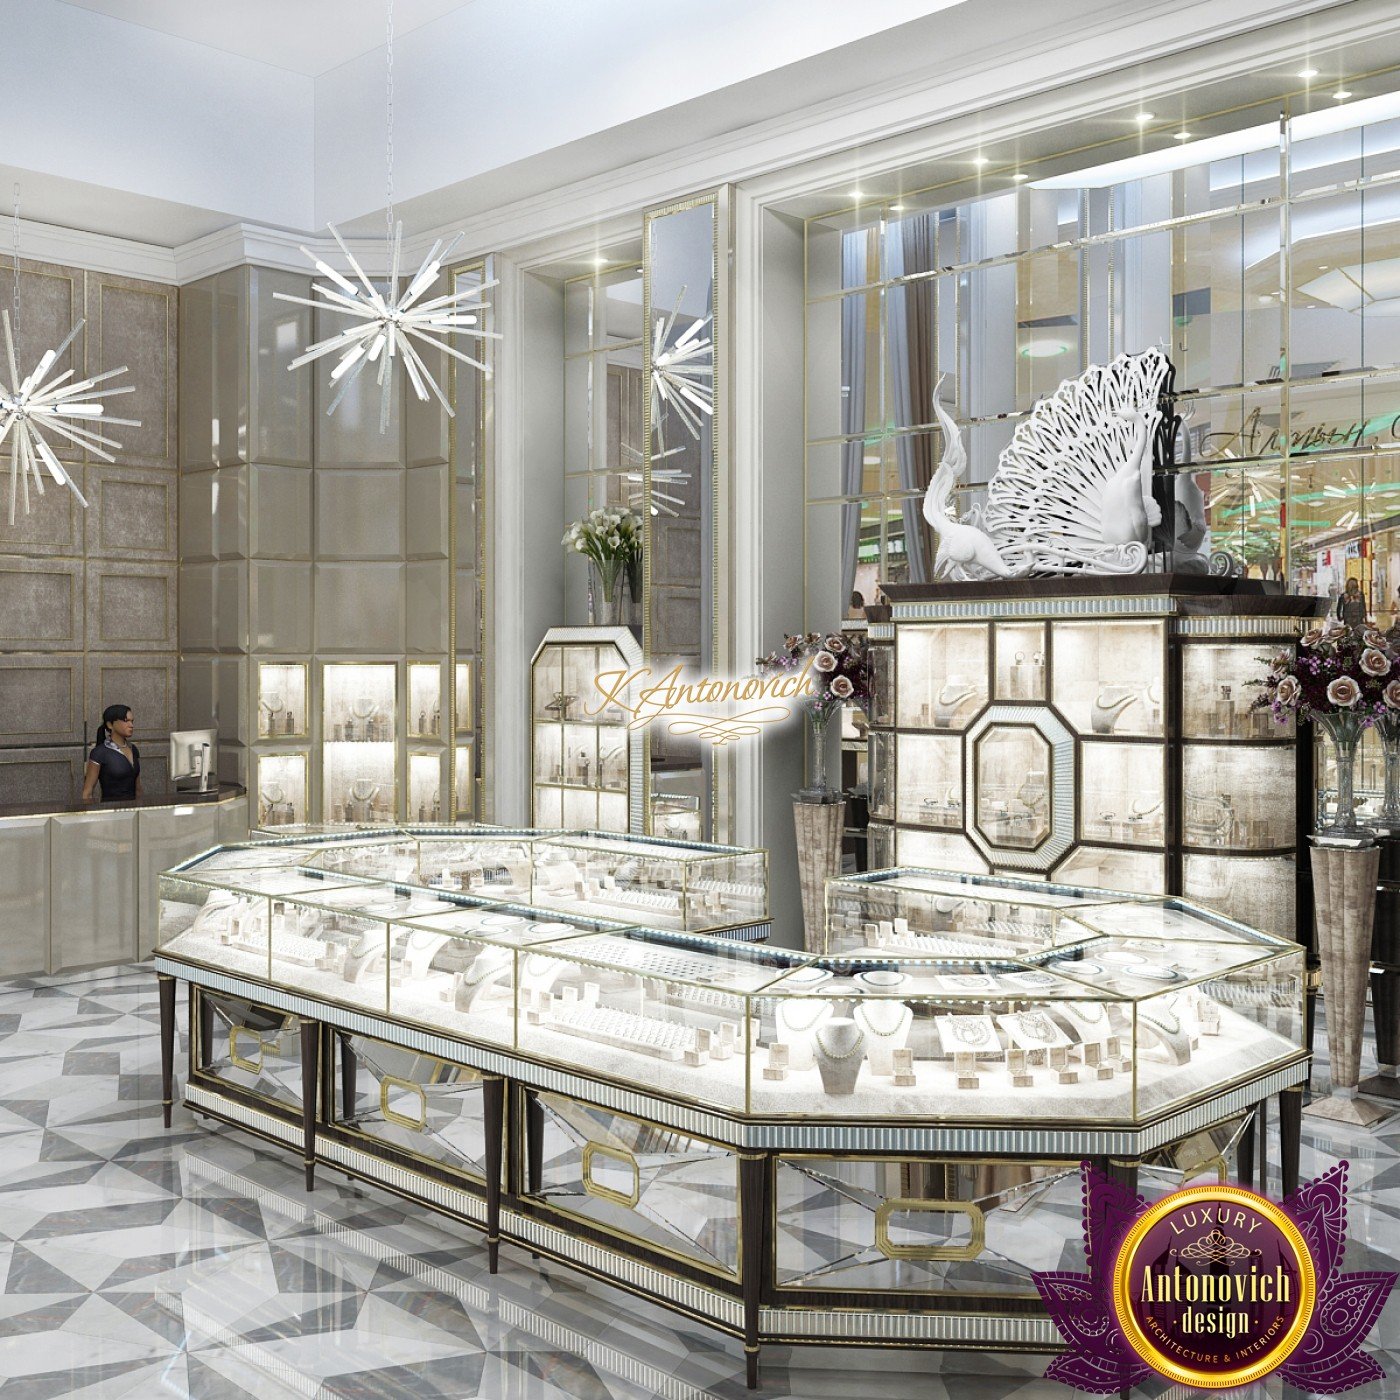 Jewelry Store's Sophisticated Interior Design – Commercial Interior Design  News